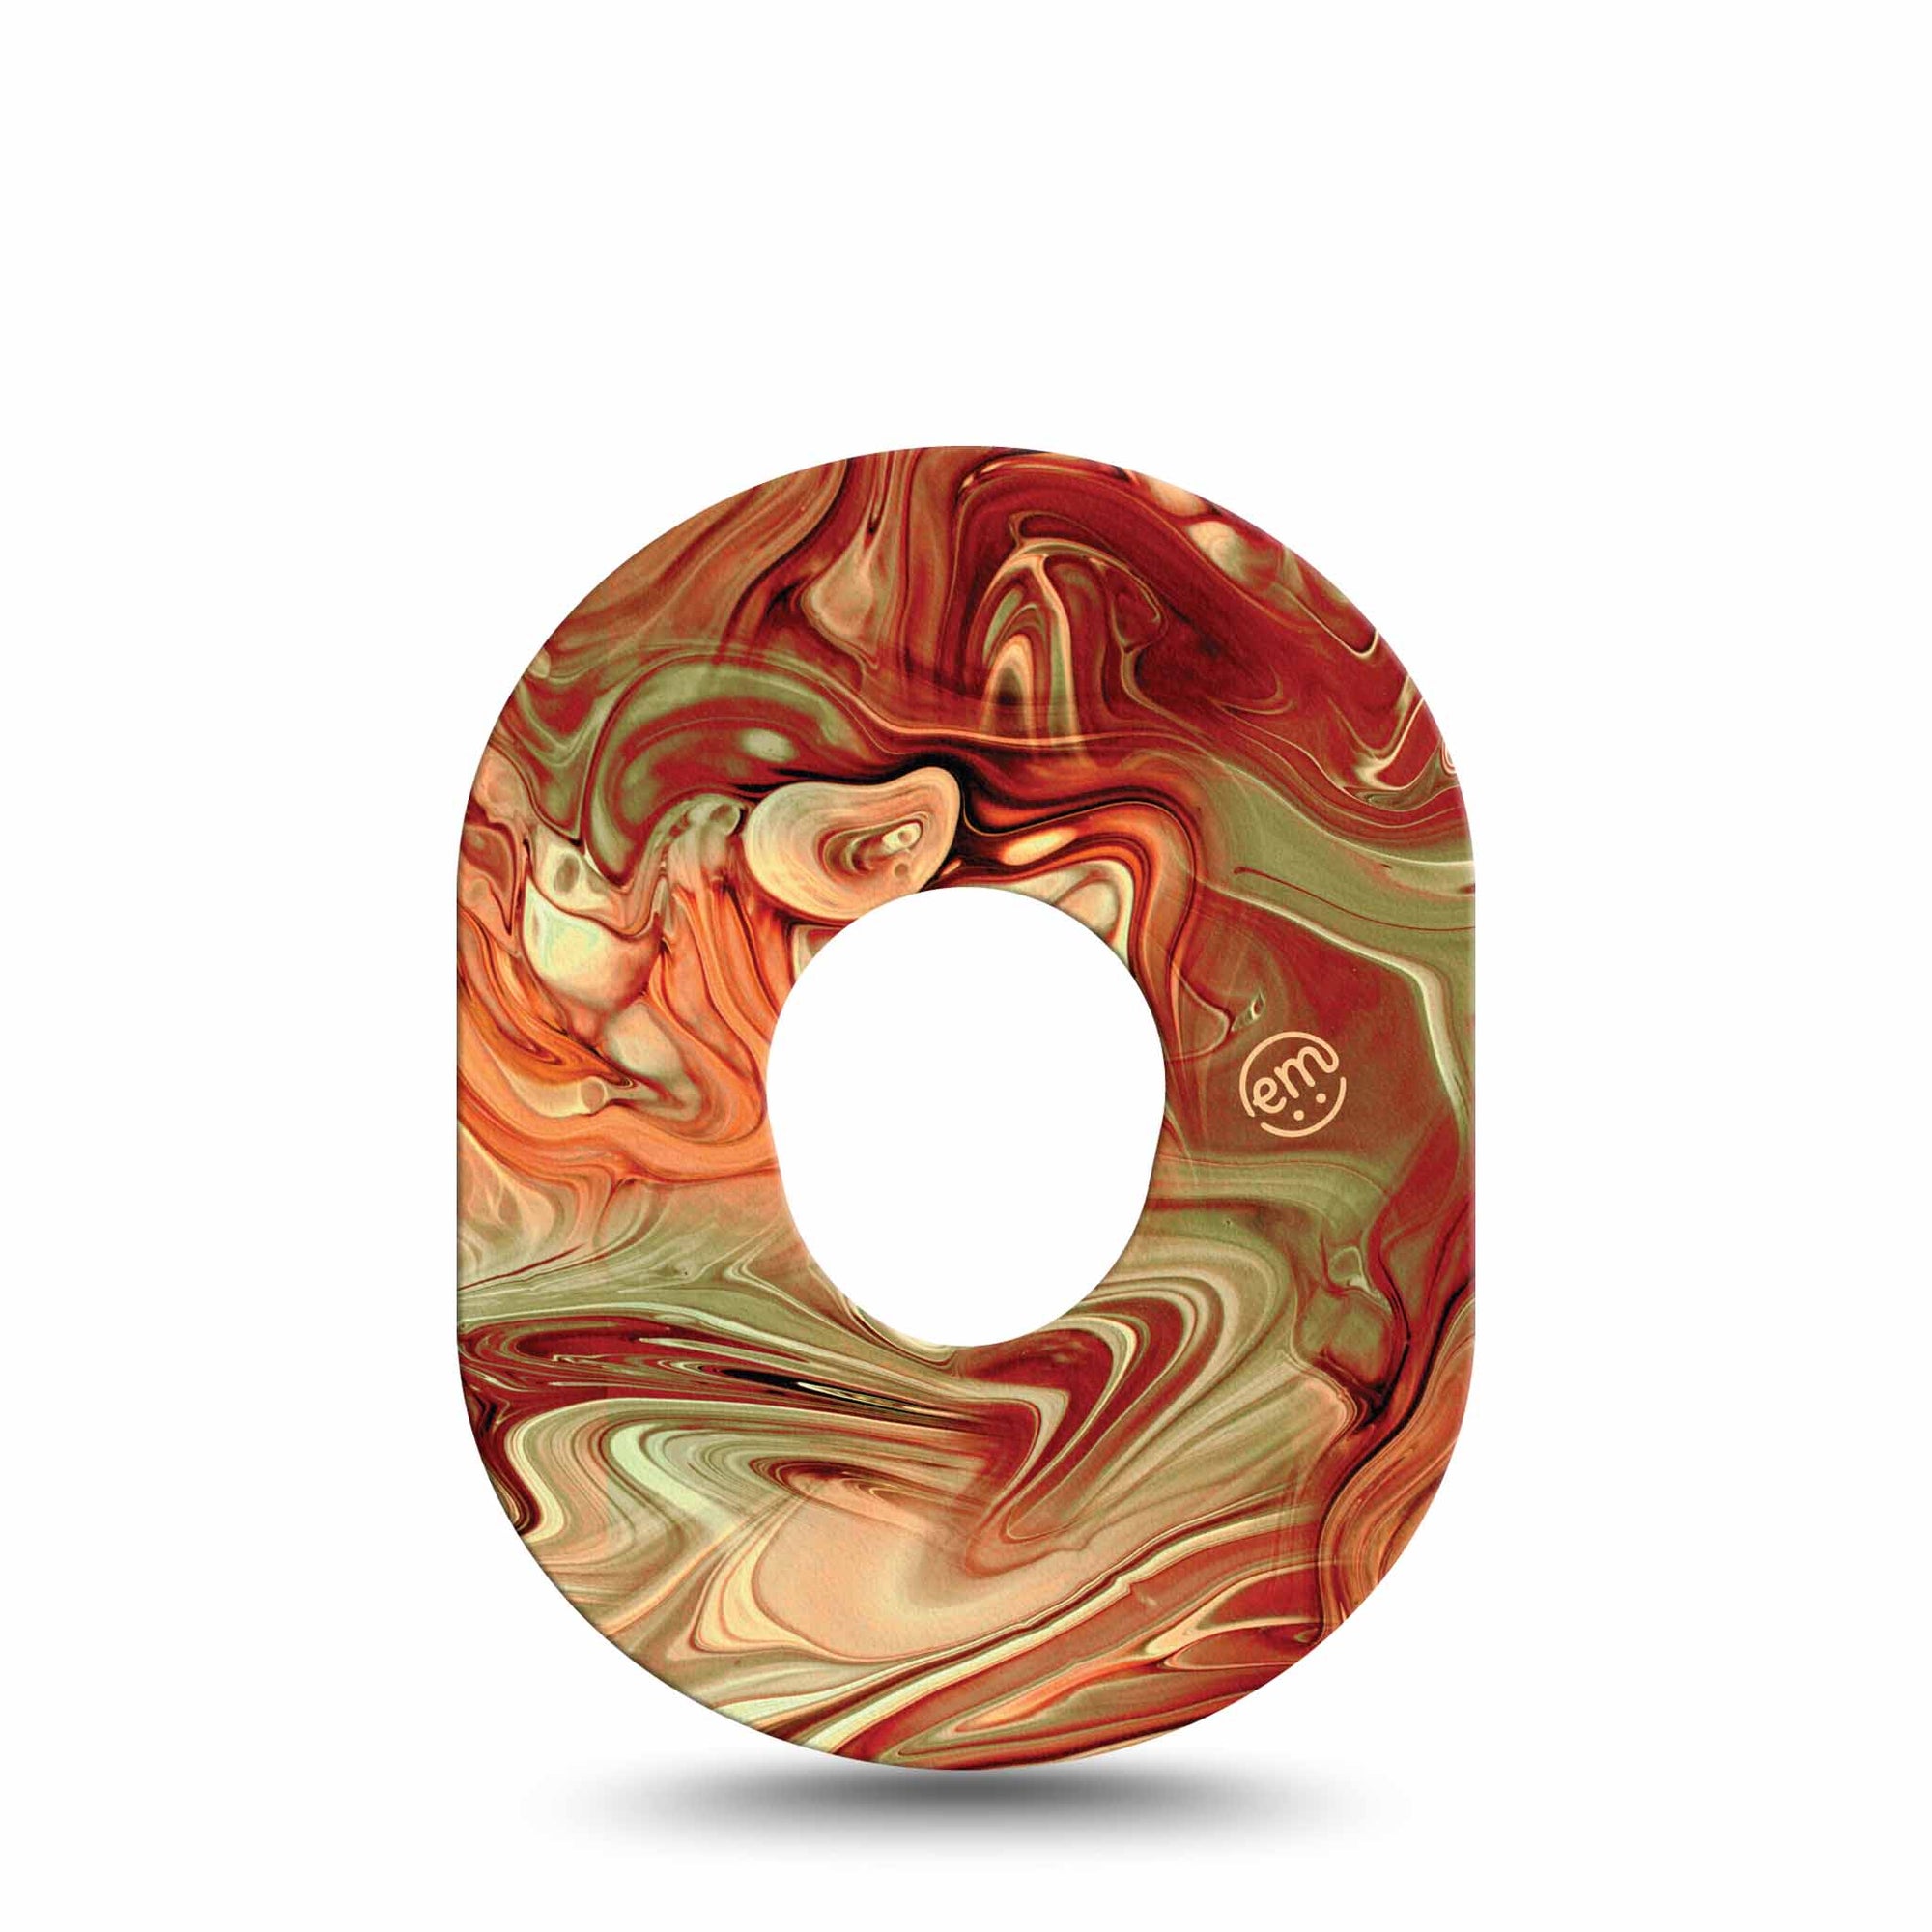 ExpressionMed Rustic Marble Dexcom G7 Tape, Single, Autumn Swirl CGM Fixing Ring Patch Design